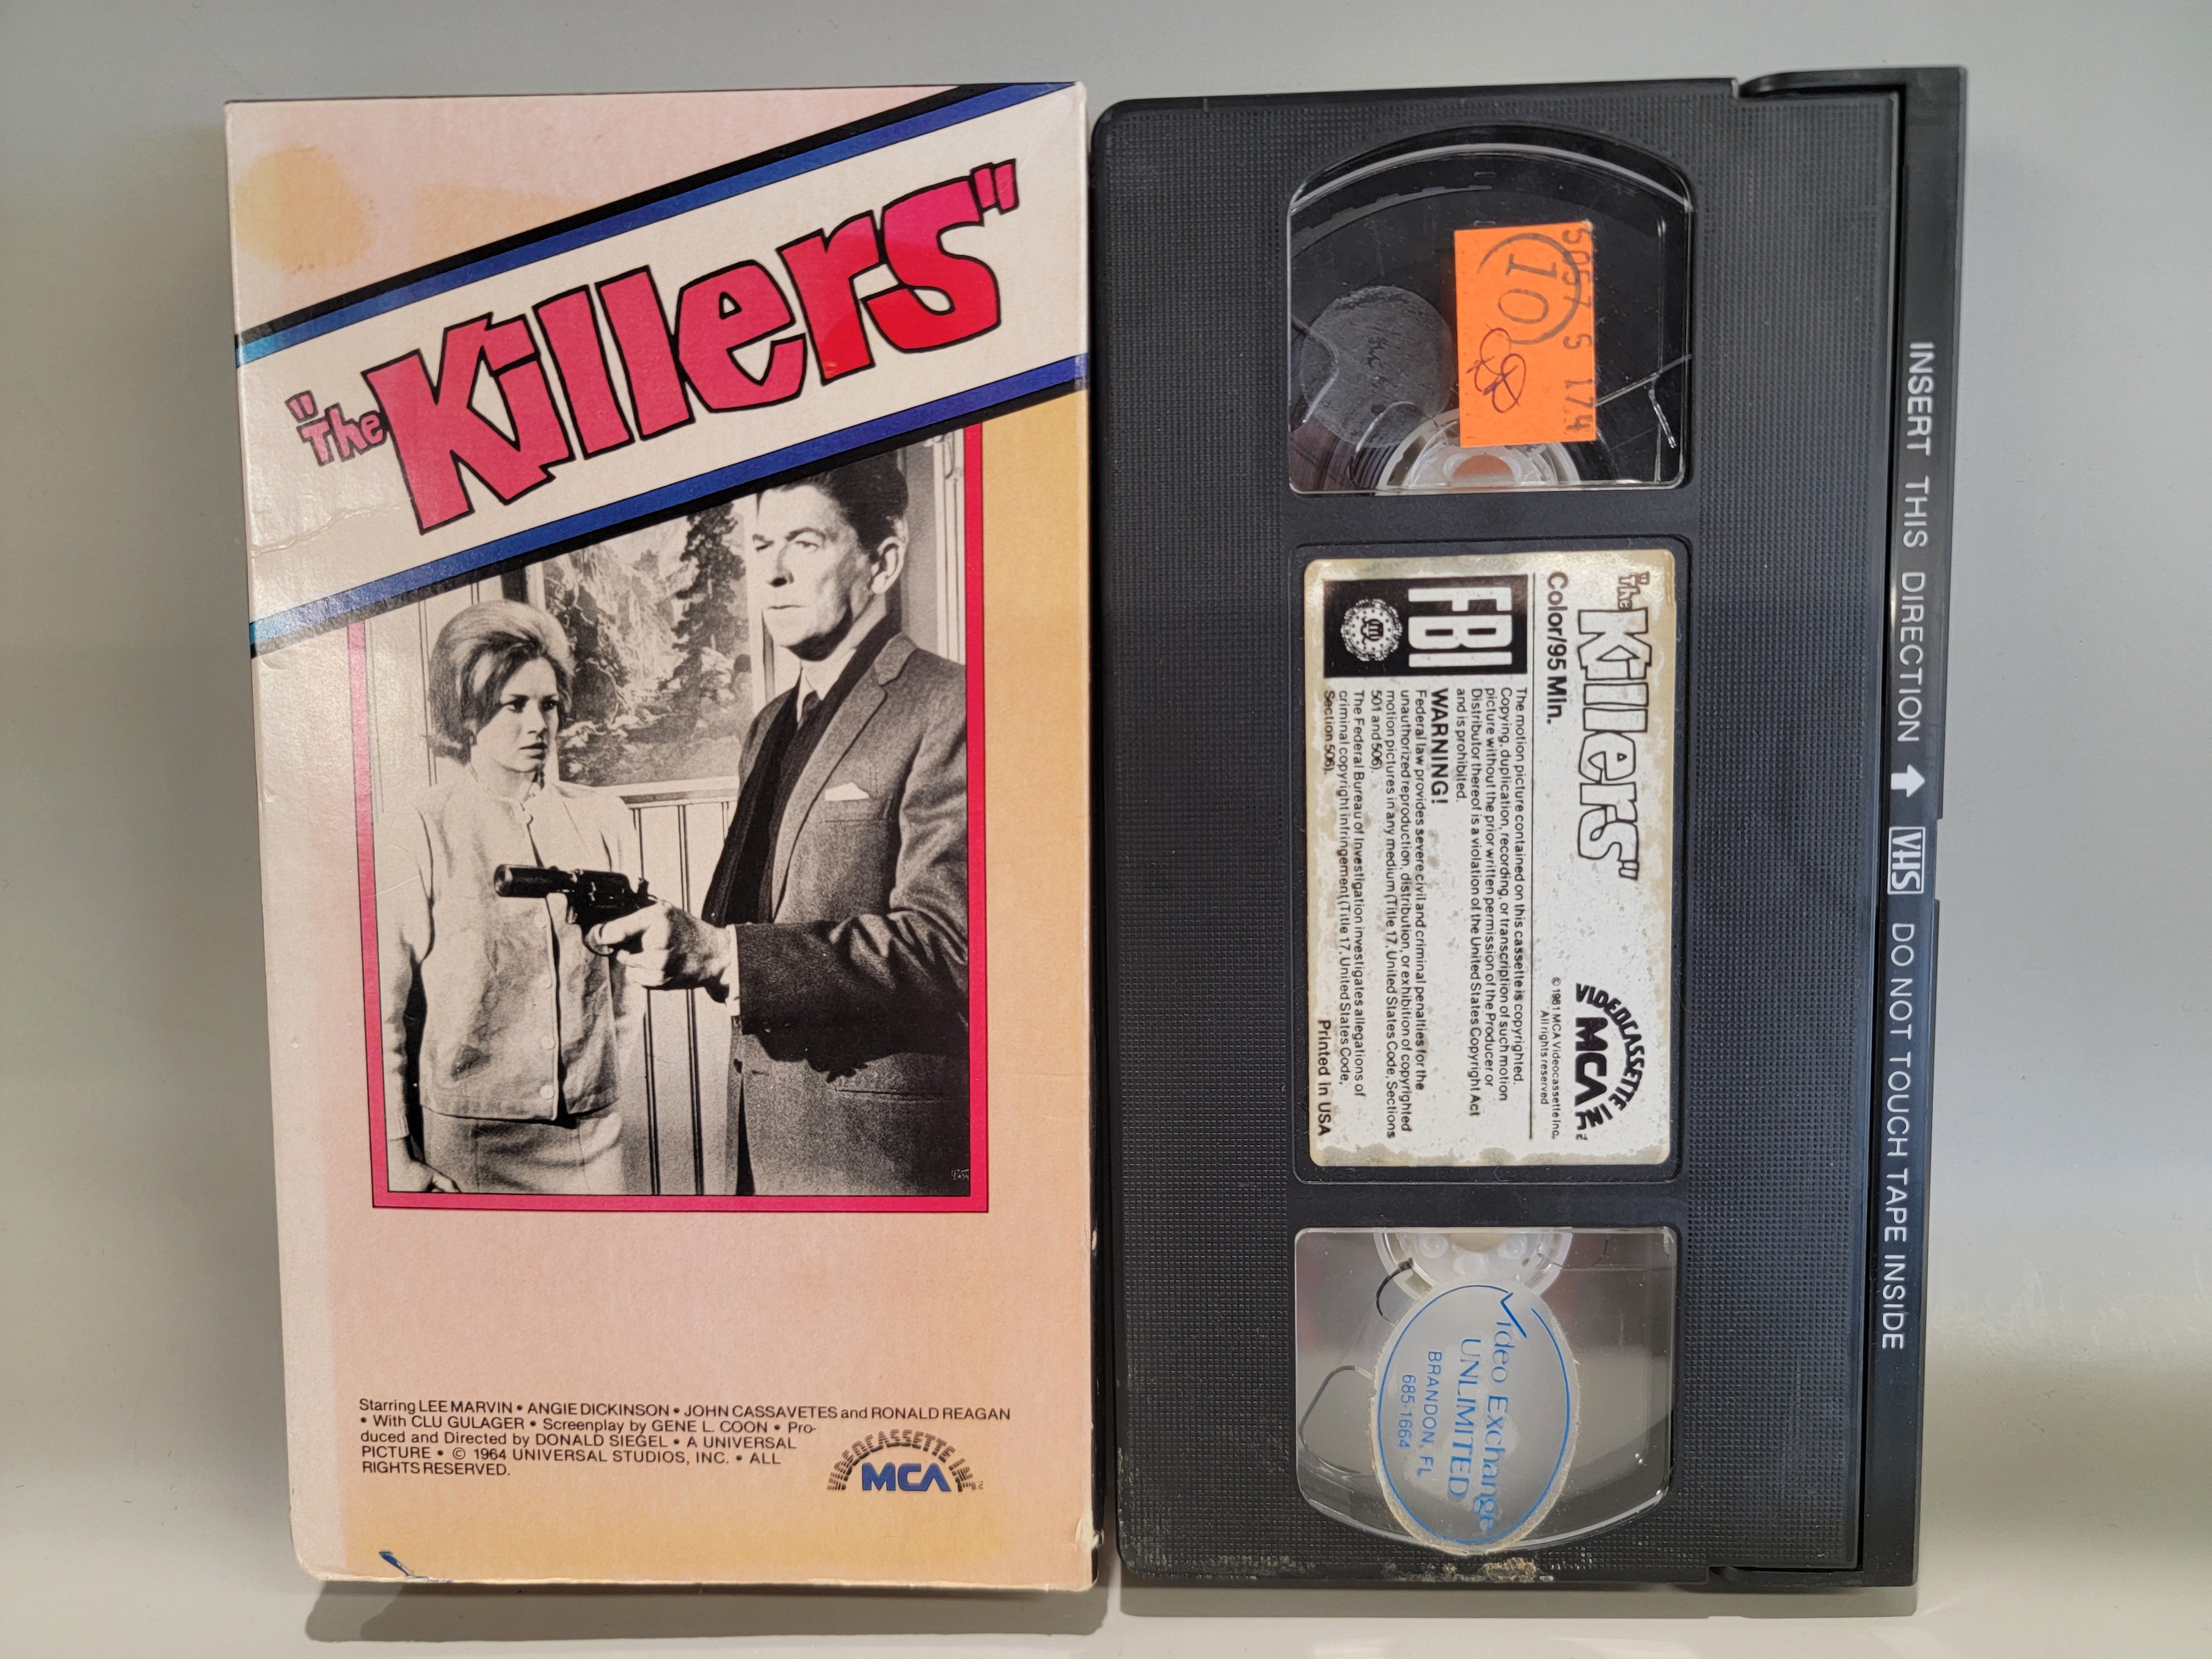 THE KILLERS VHS [USED]